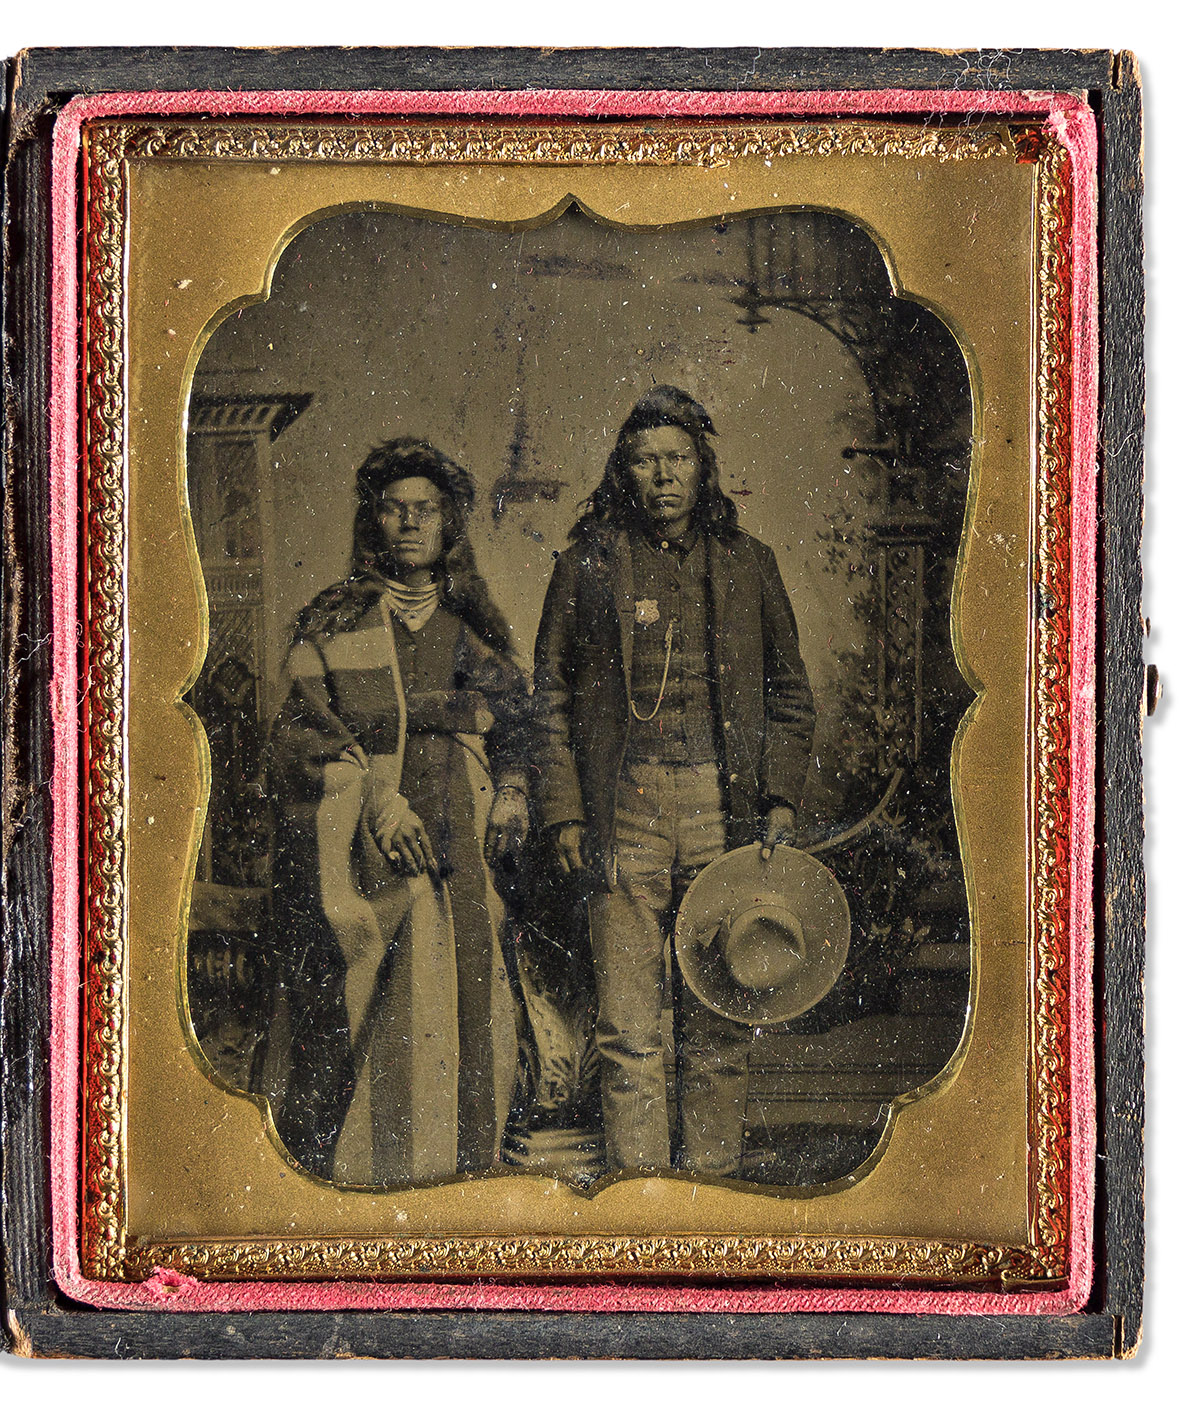 (AMERICAN INDIANS.) Portrait of a tribal policeman and his wife.